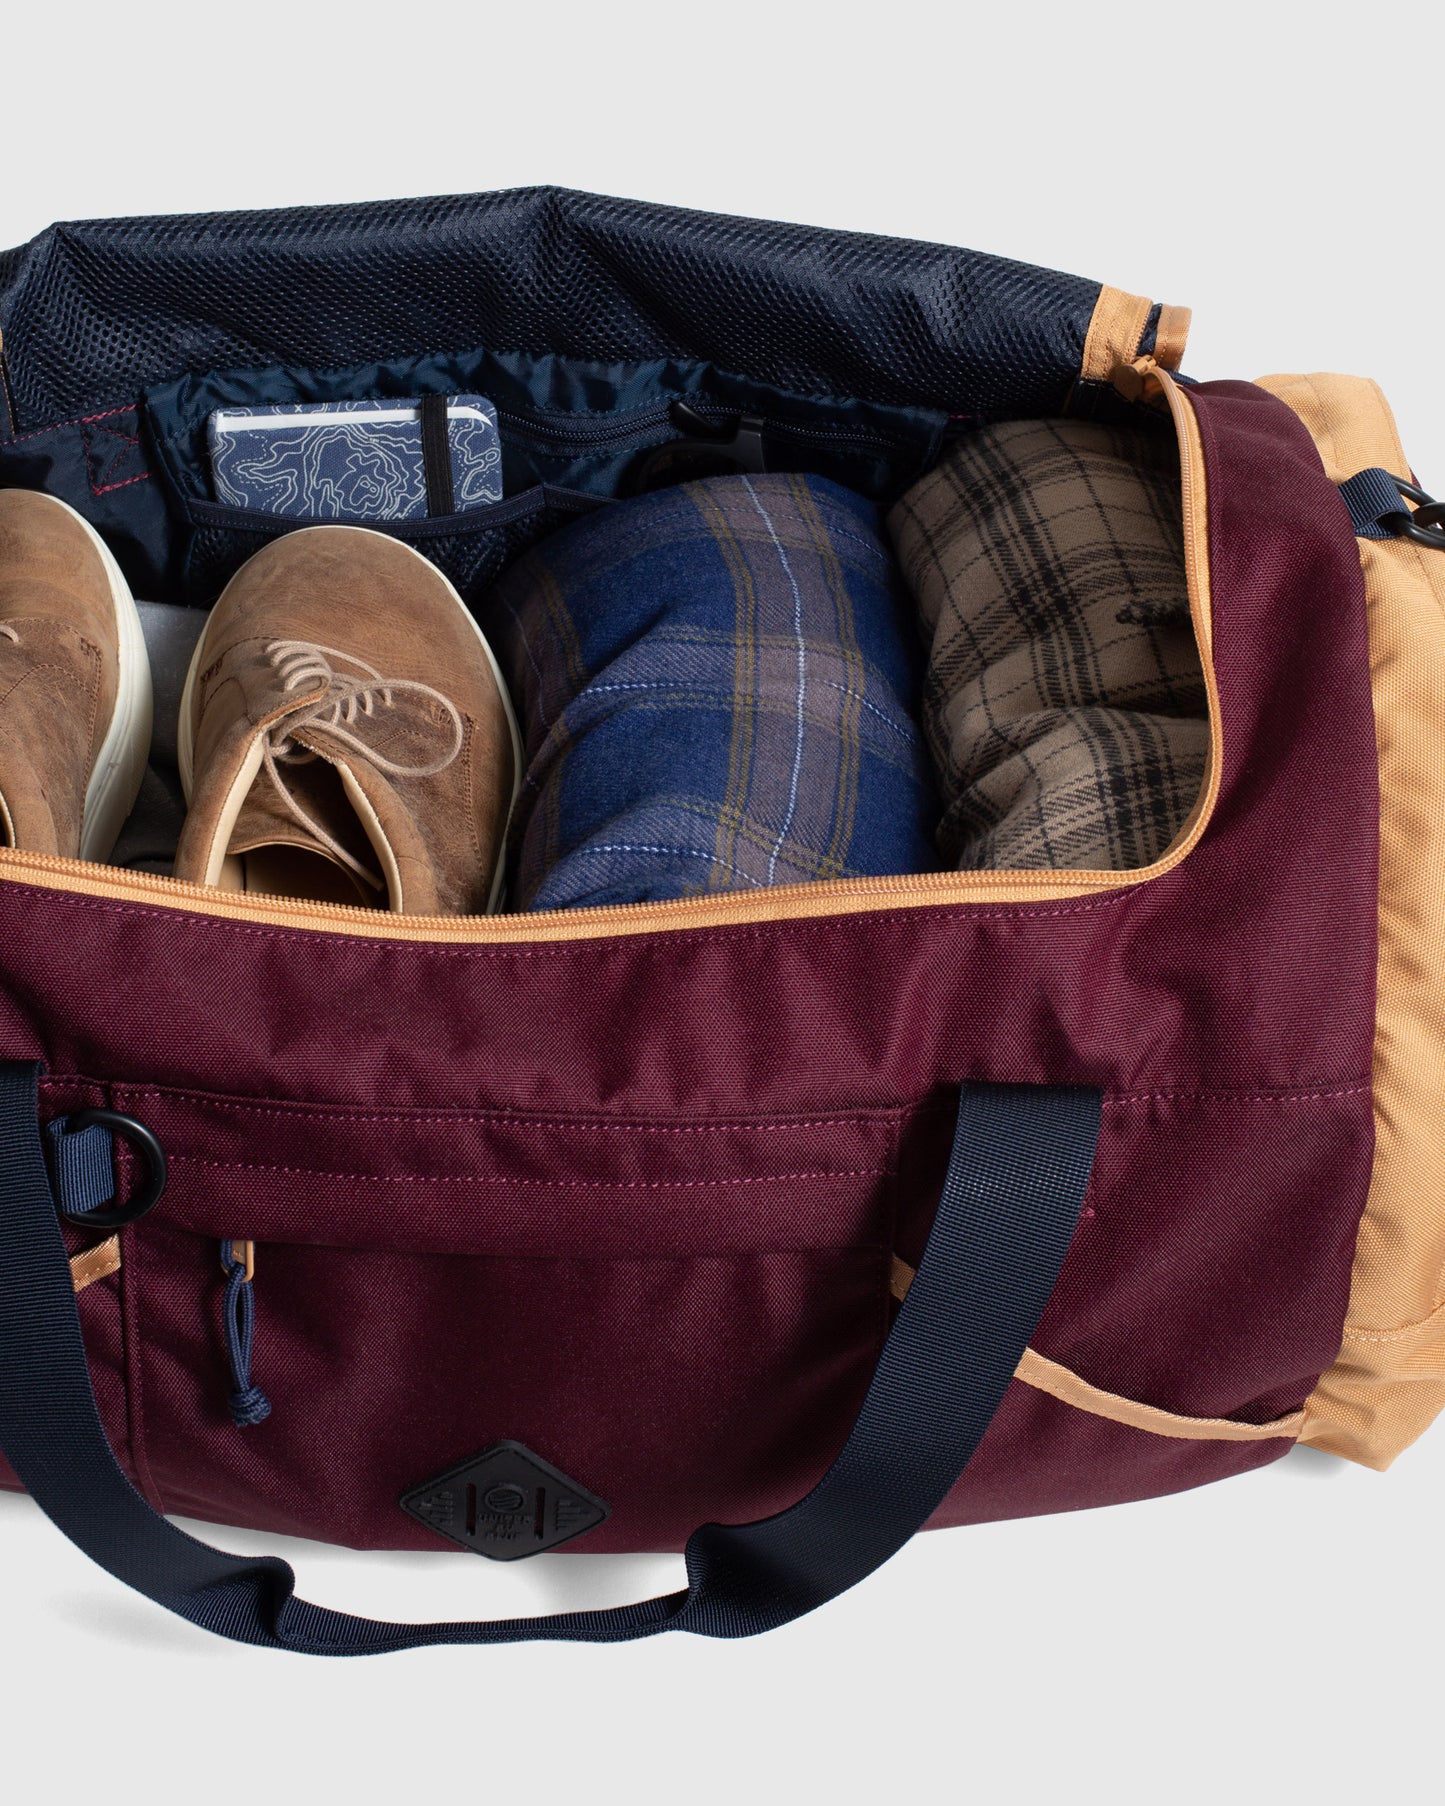 Inside of the duffle bag by United by Blue